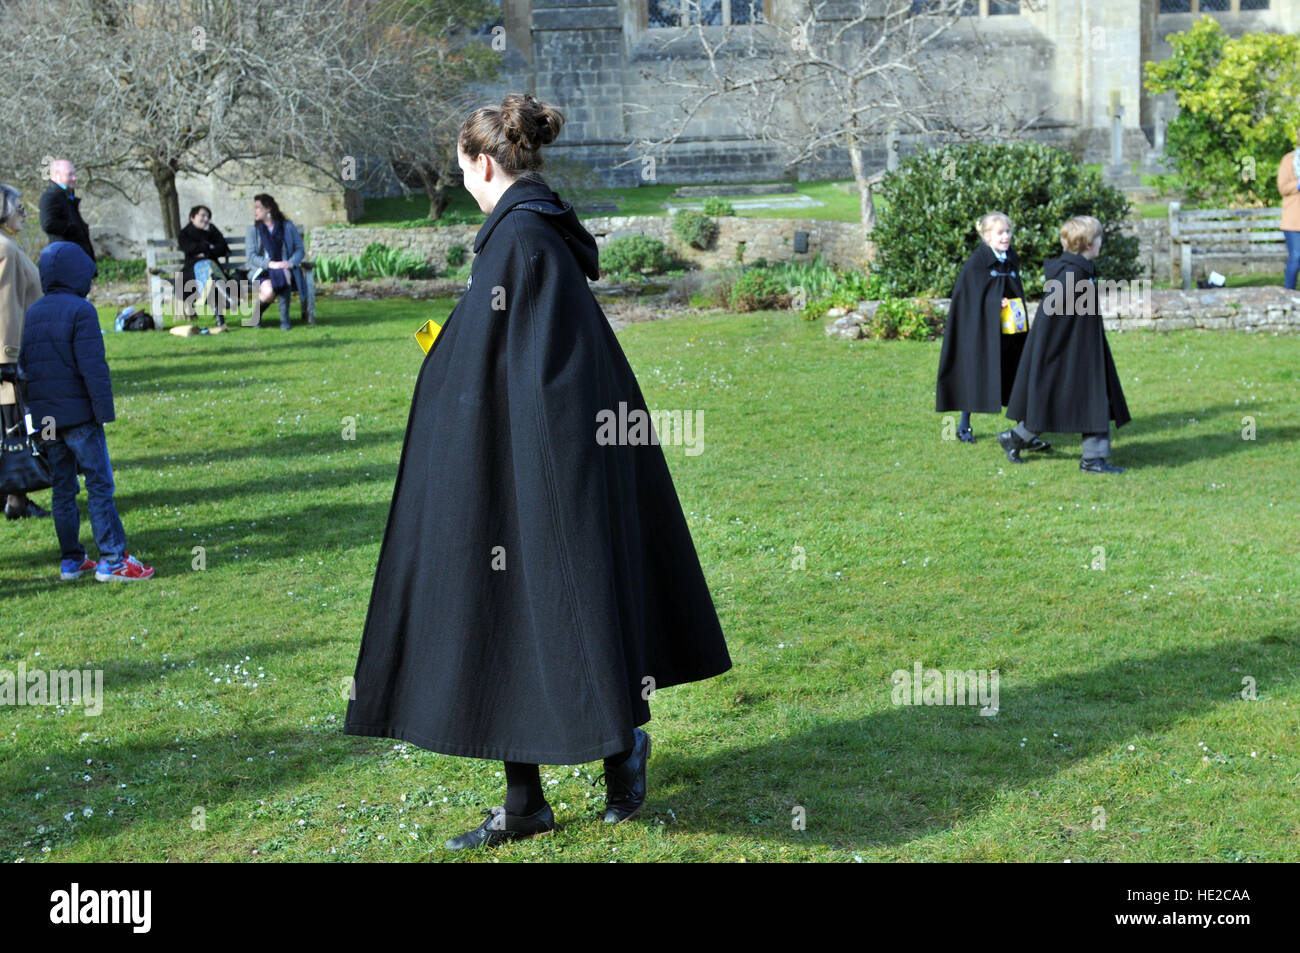 Choristers from Wells Cathedral Choirin Easter Egg hunt to celebrate end of Easter chorister duties in Camery Garden. Stock Photo